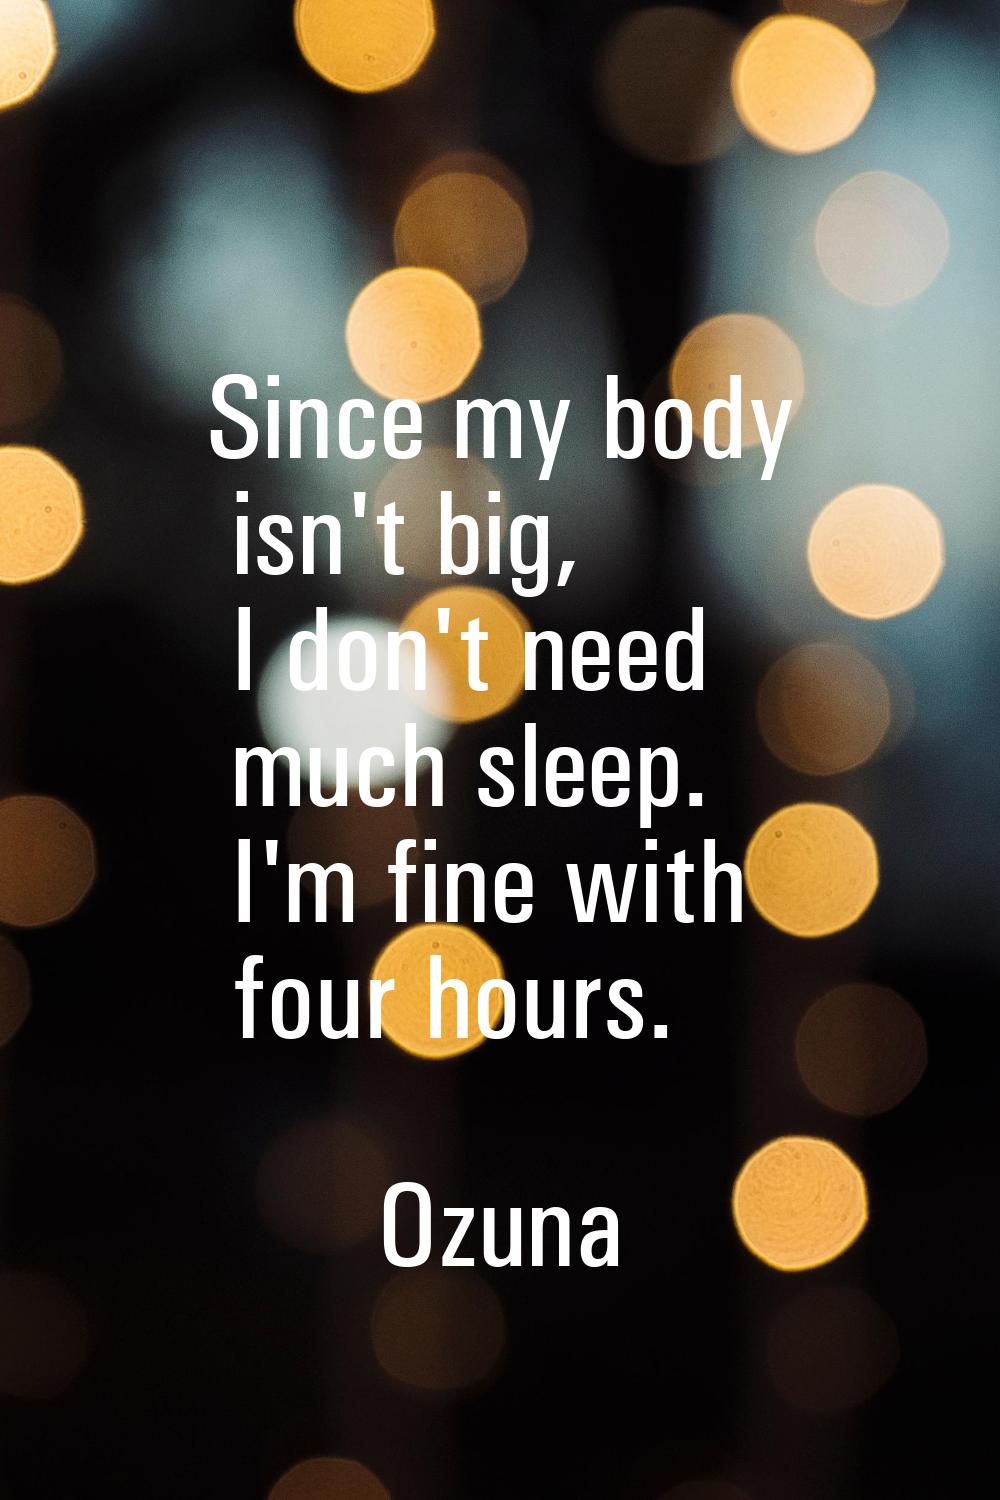 Since my body isn't big, I don't need much sleep. I'm fine with four hours.